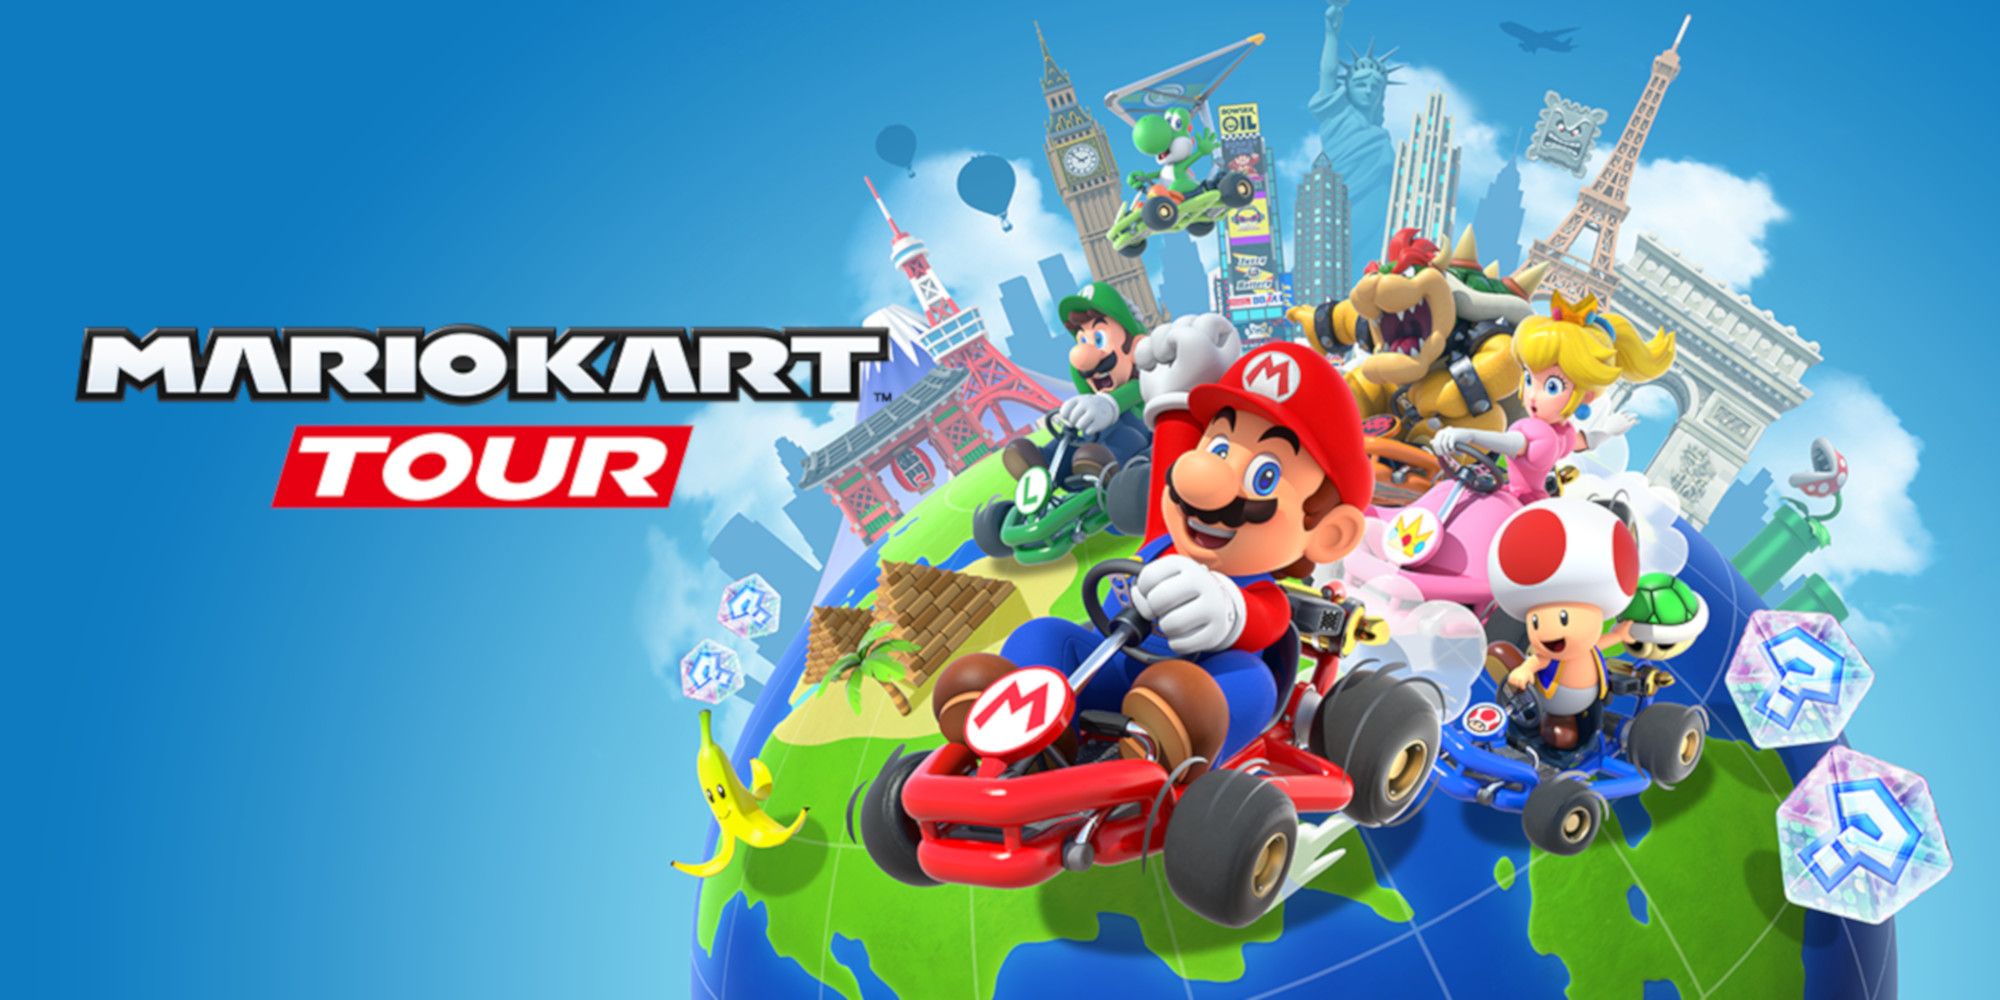 Promotional Banner of the Mario Kart Tour cast racing on a globe with a cityscape behind them